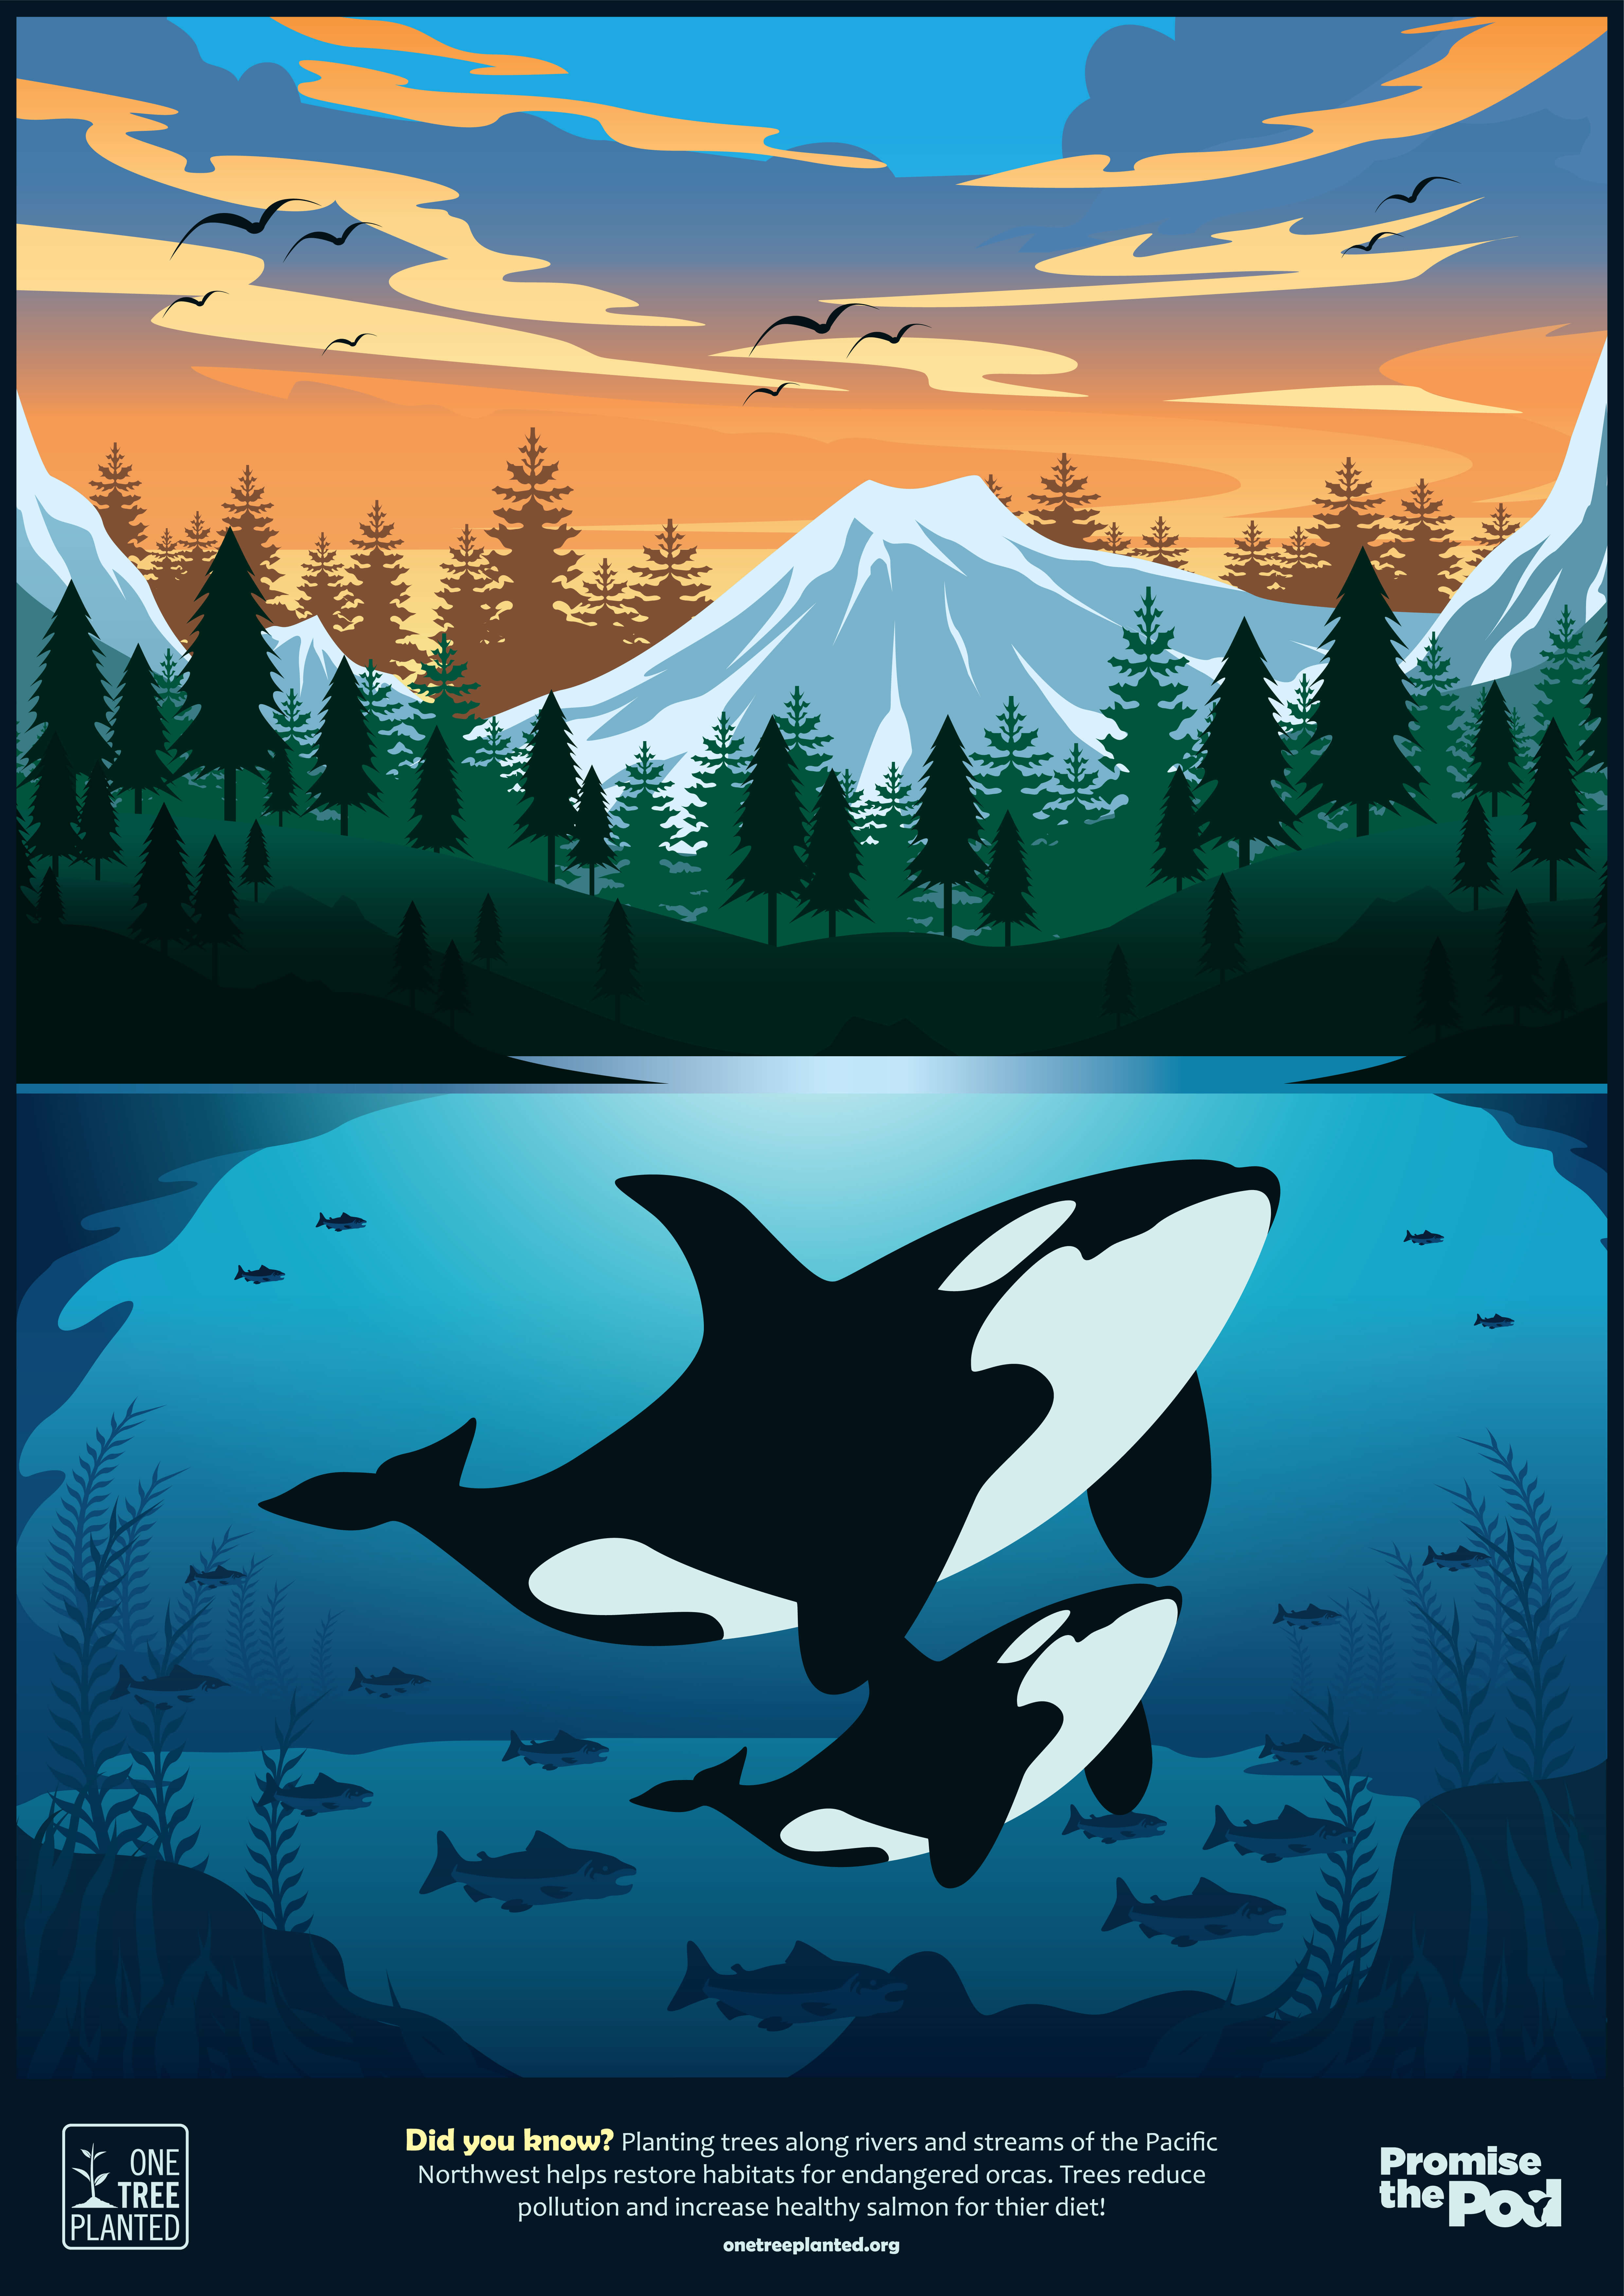 Orca Poster